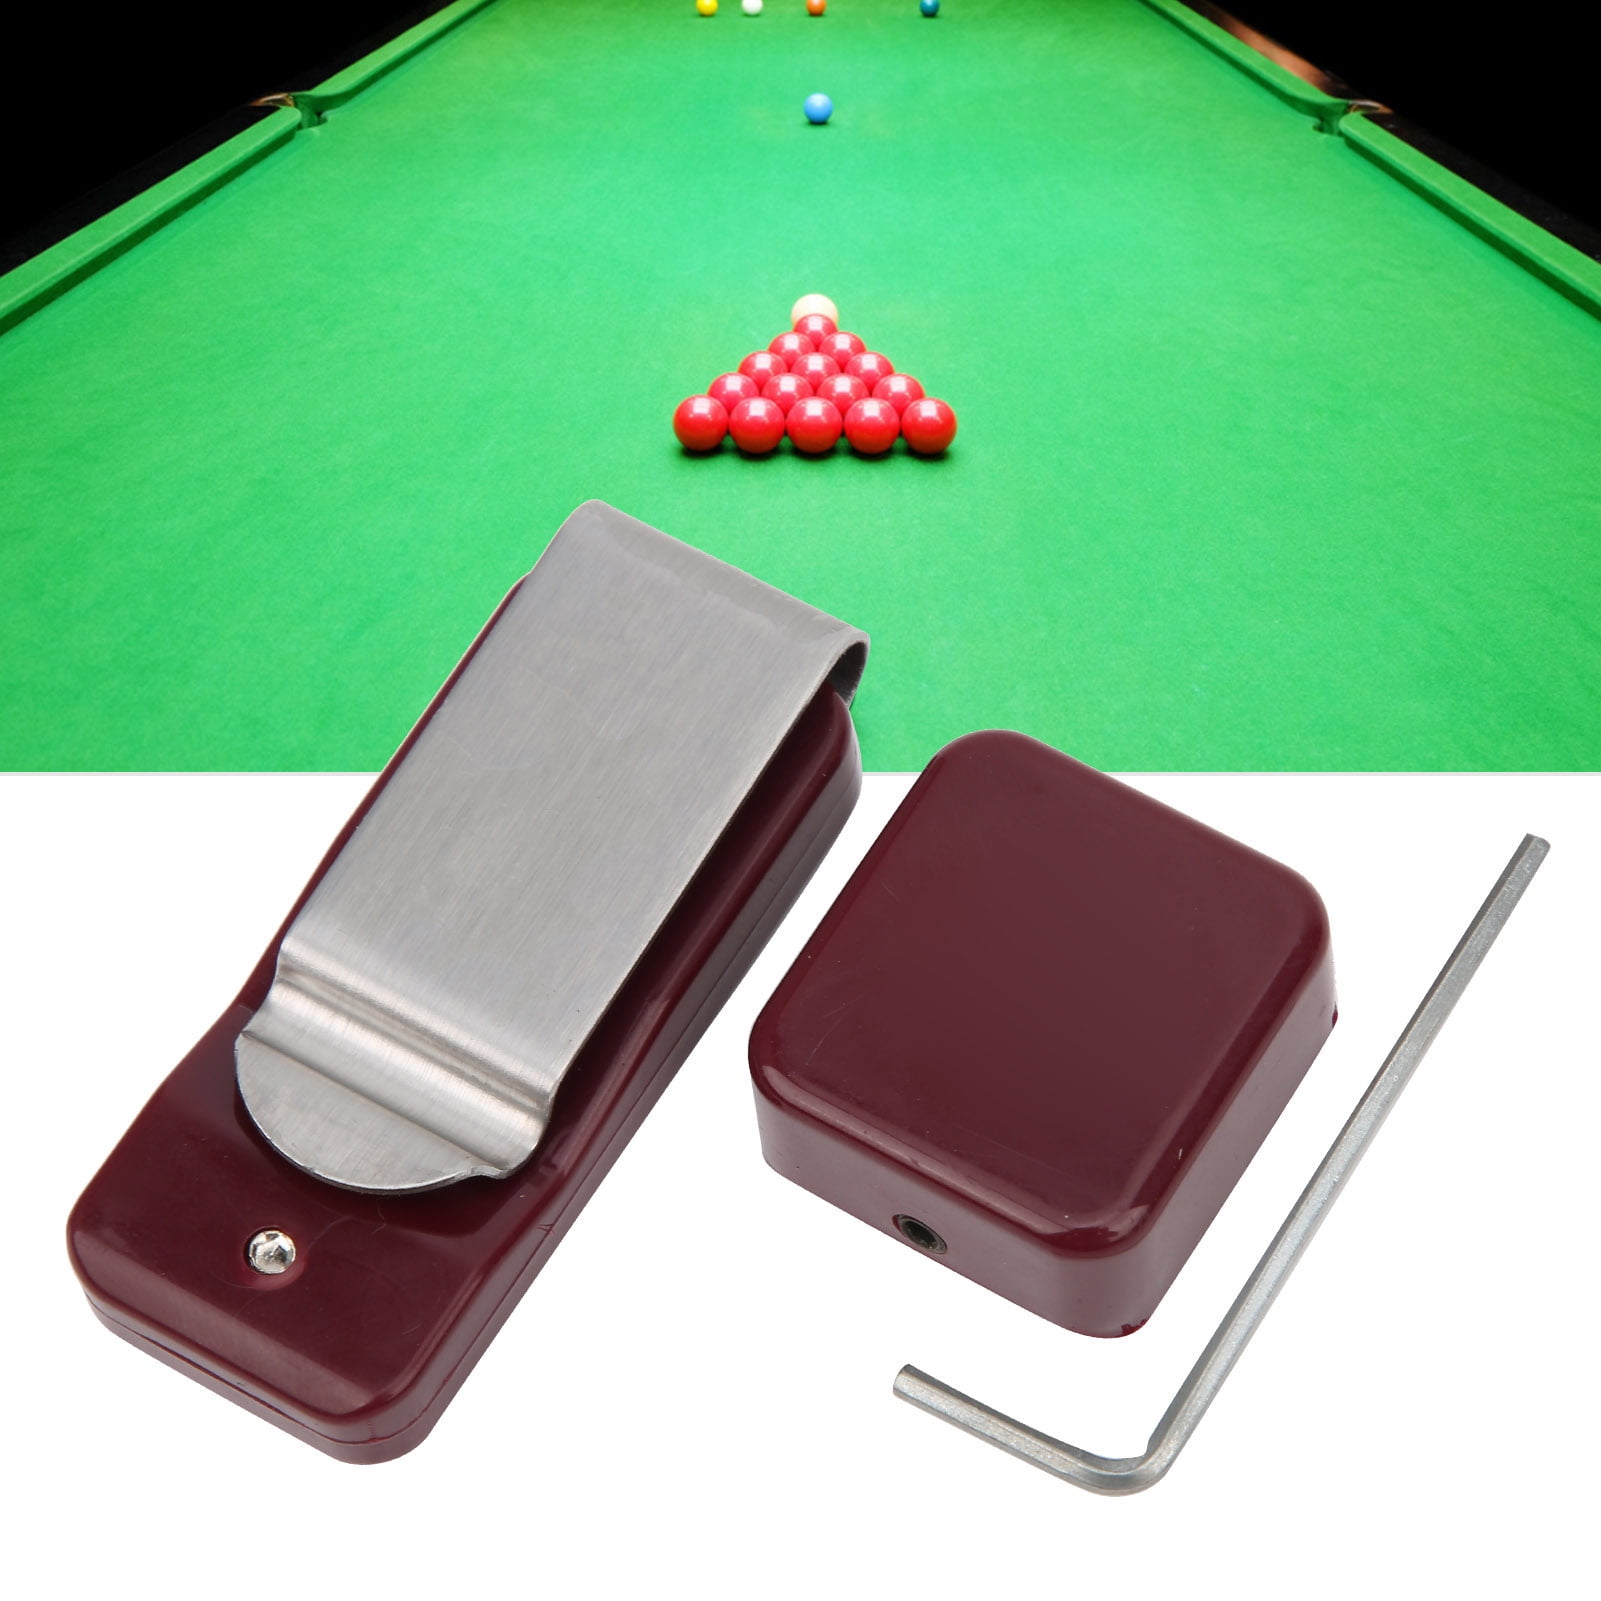 2x Pool Billiard Cue Tip Table Chalk Holder with String Table Accessories 